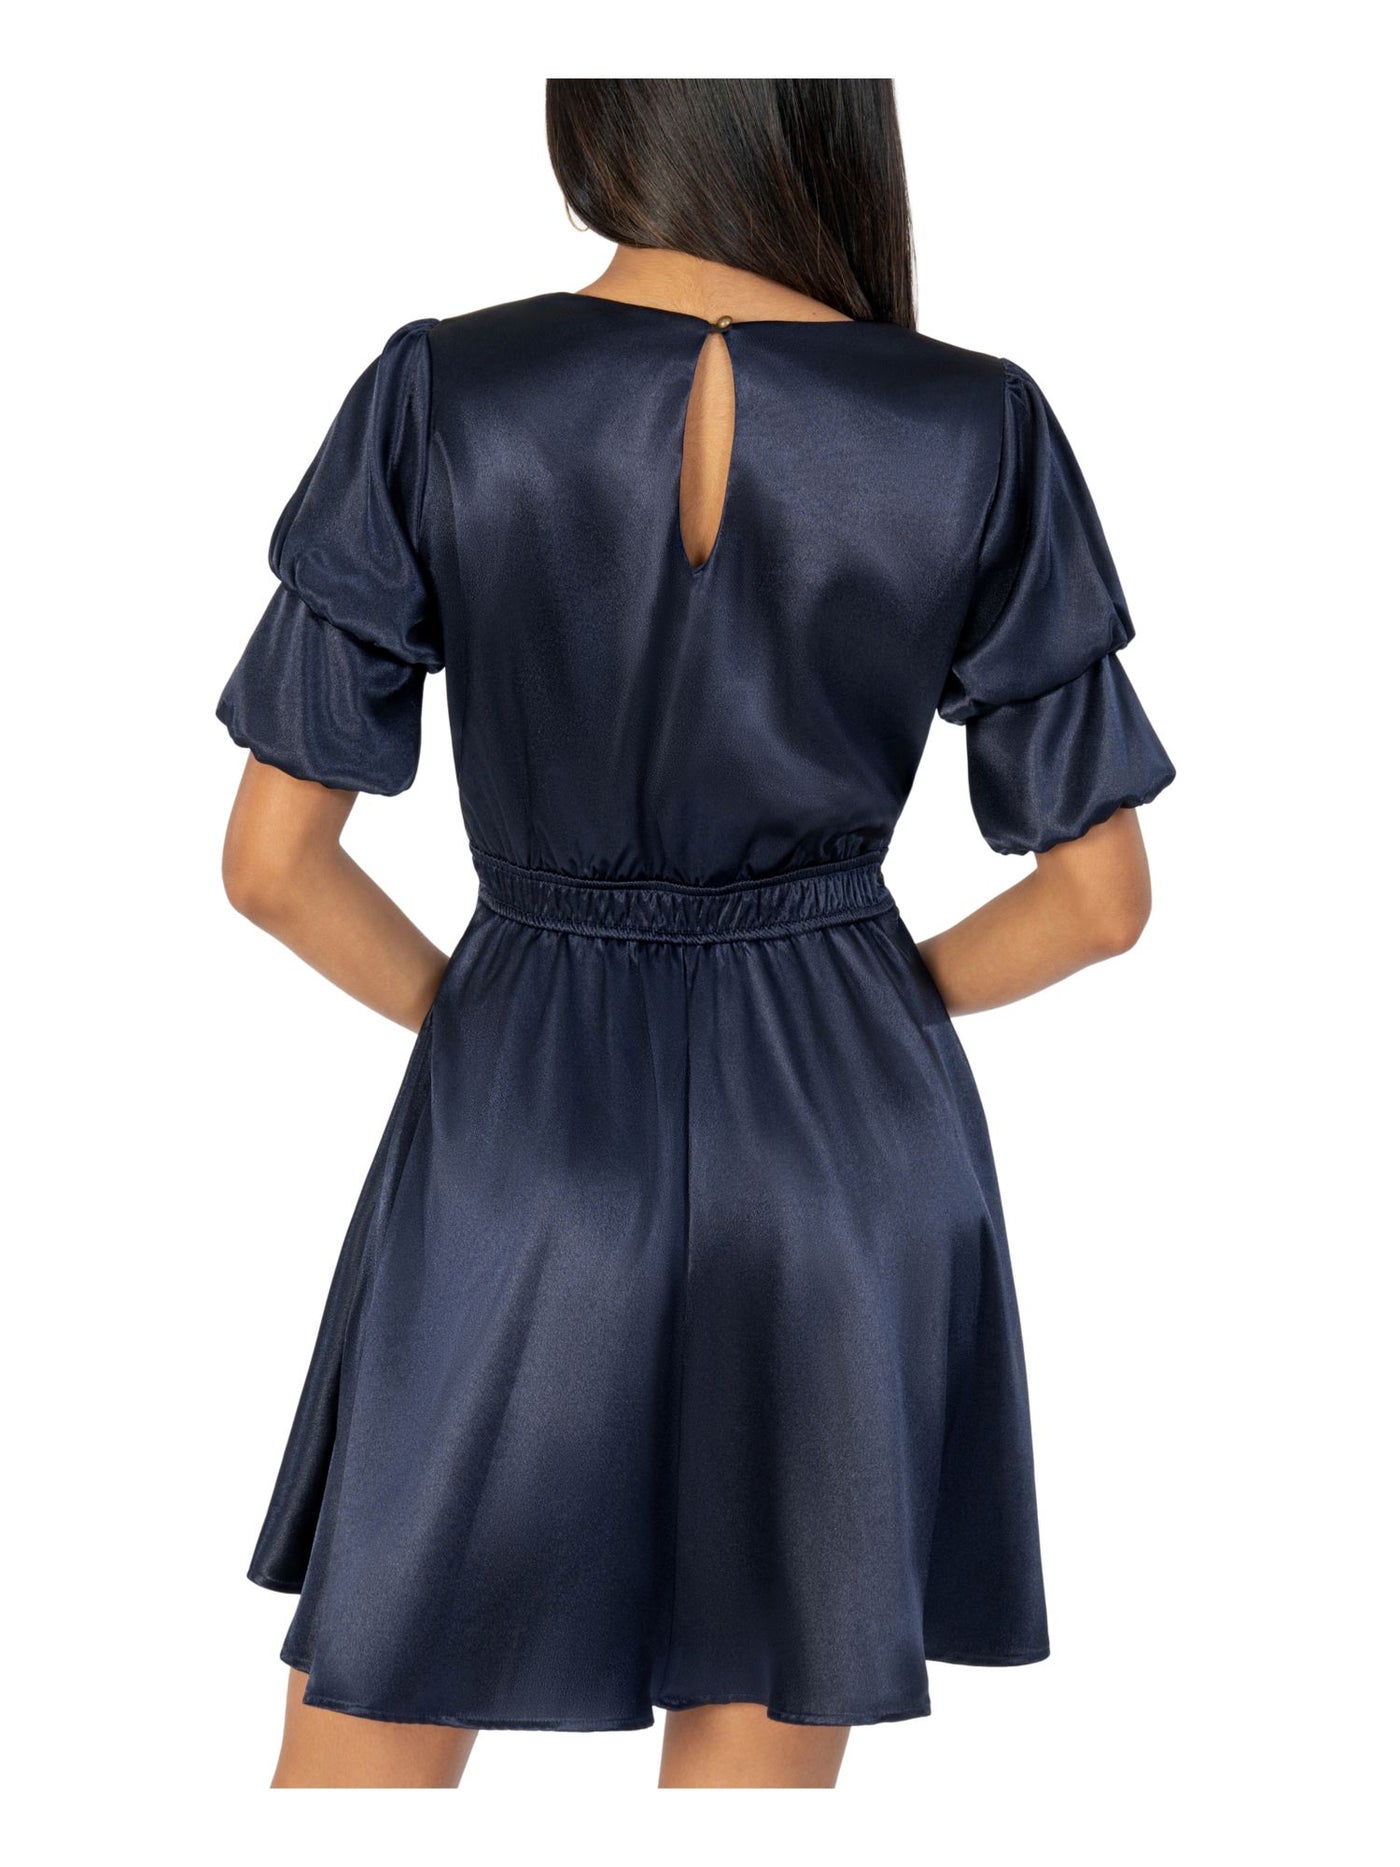 SPEECHLESS Womens Navy Pocketed Darted Satin Short Sleeve V Neck Short Party Fit + Flare Dress Juniors 9